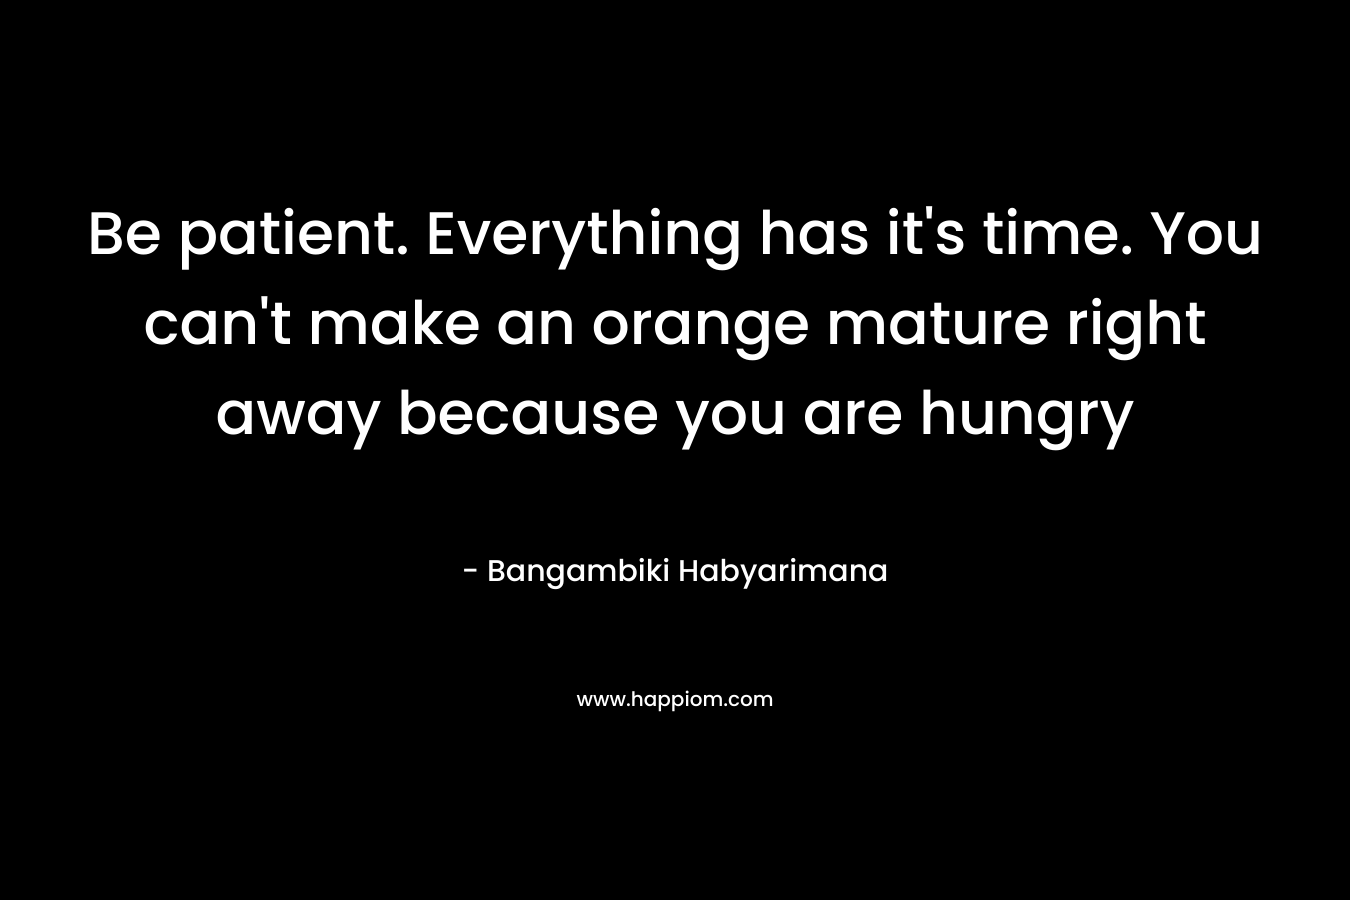 Be patient. Everything has it's time. You can't make an orange mature right away because you are hungry